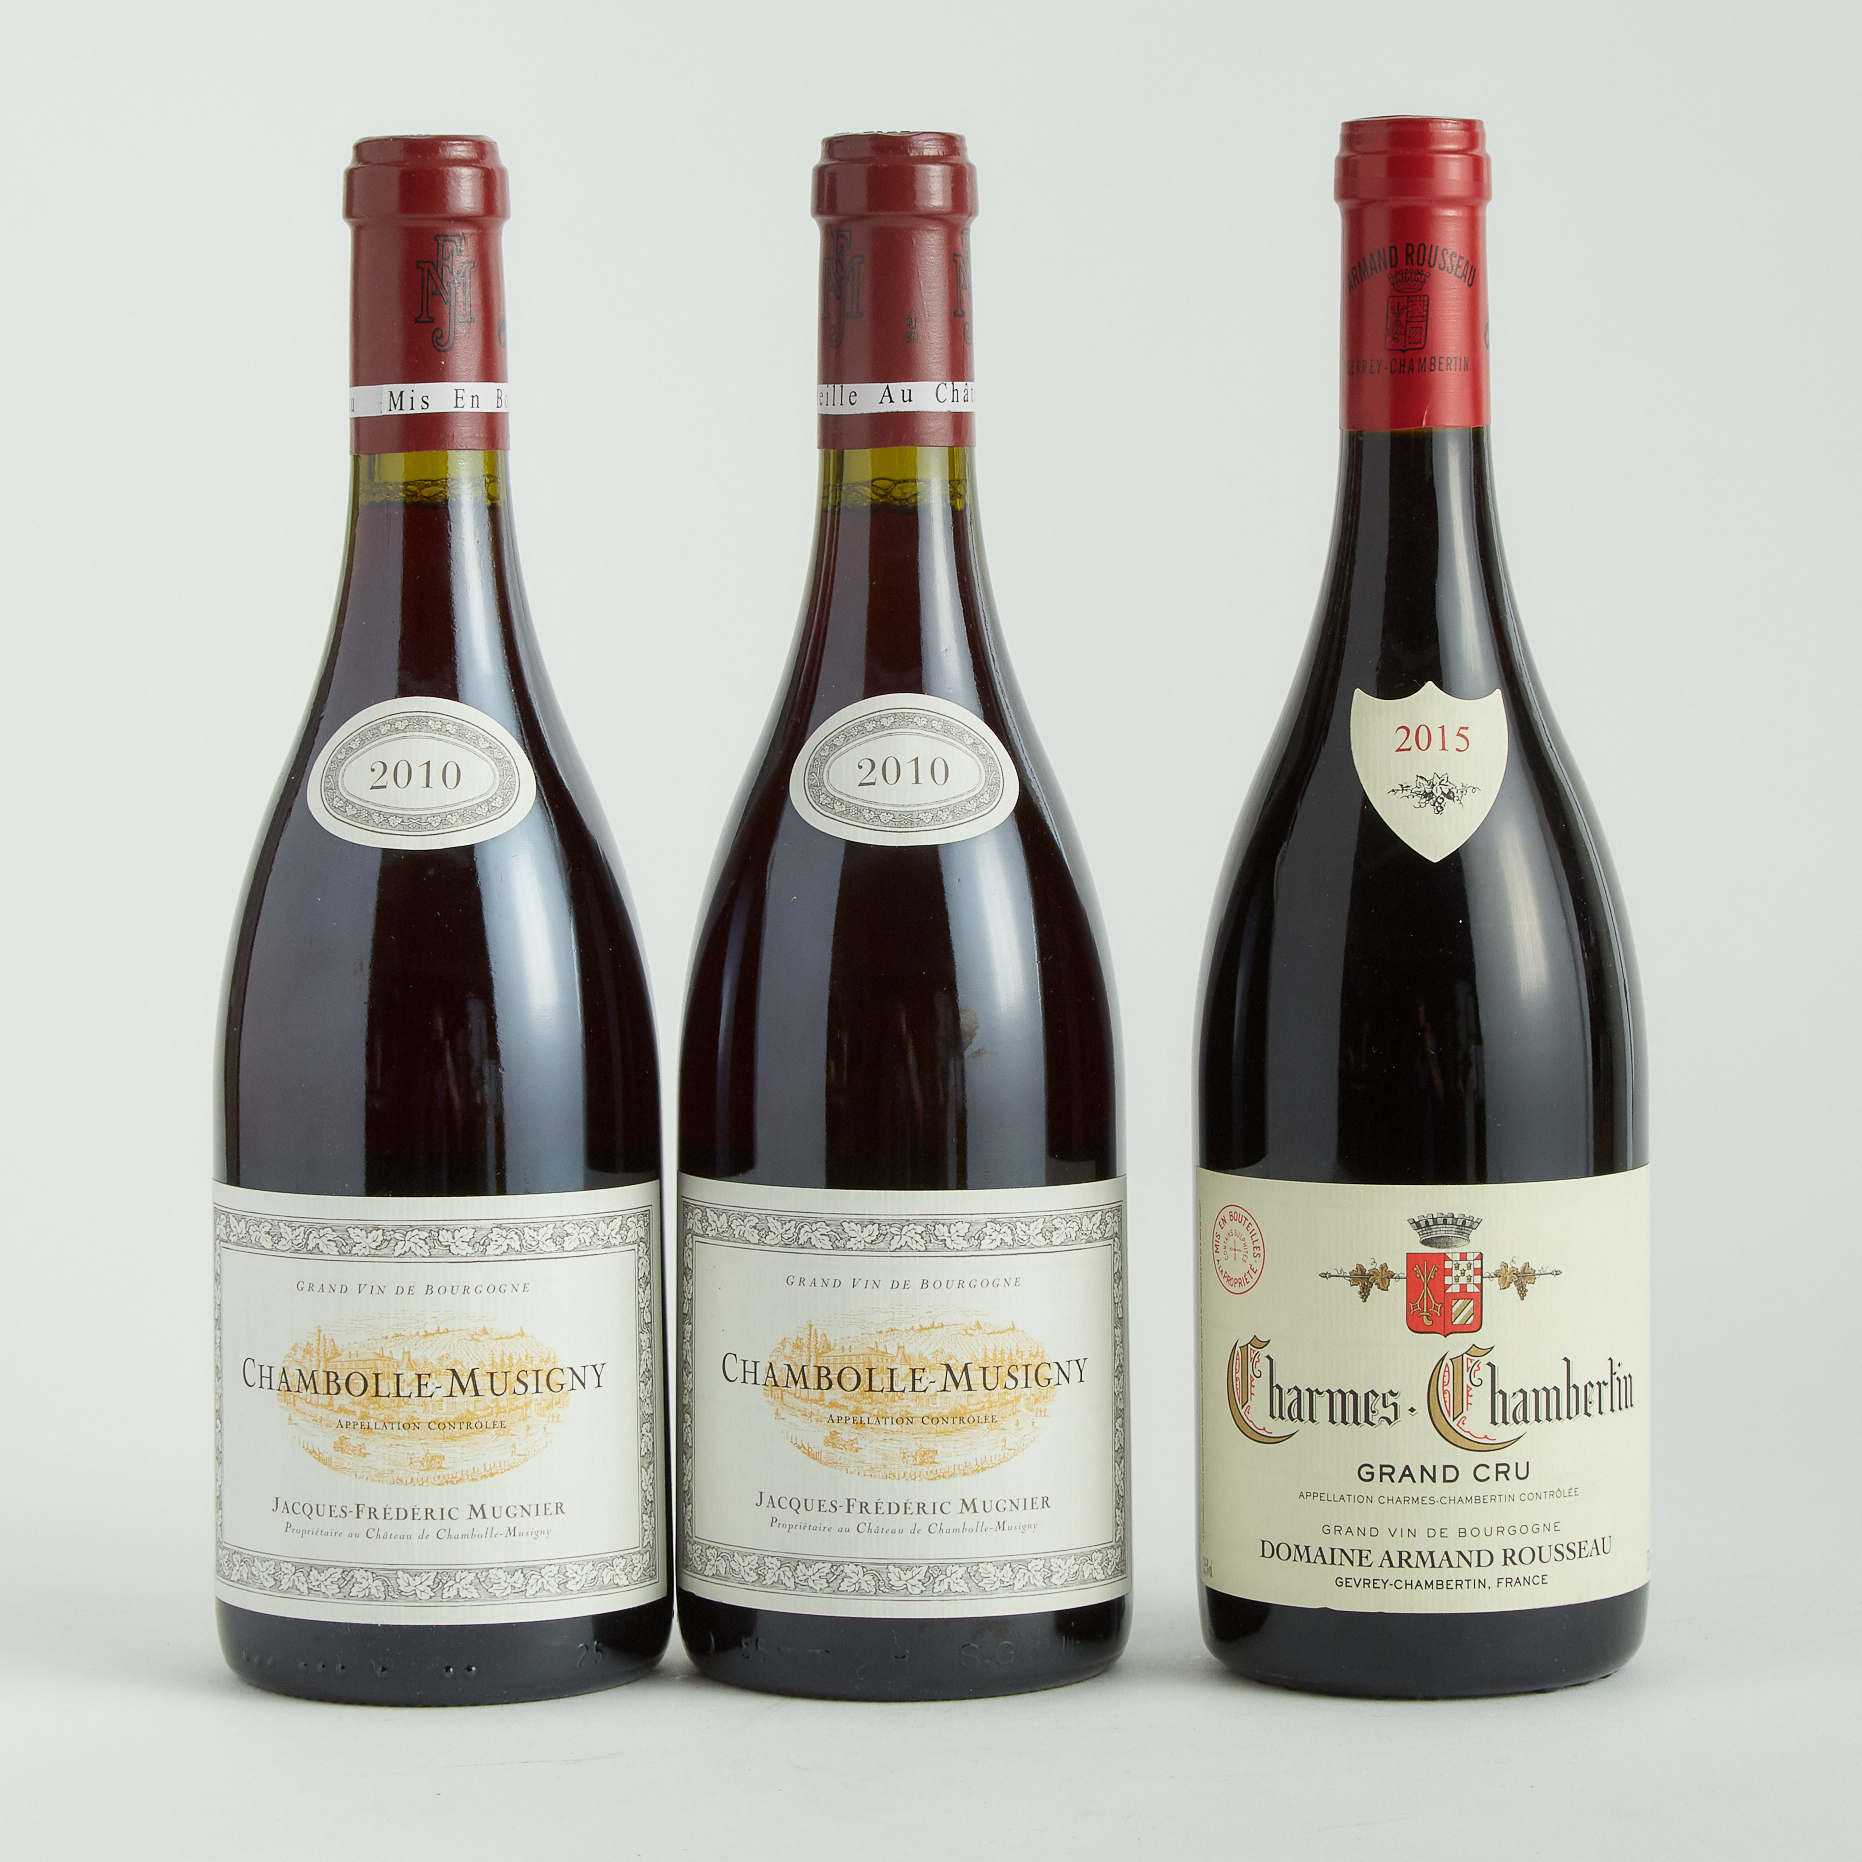 DOMAINE ARMAND ROUSSEAU CHARMES-CHAMBERTIN 2015 (1)
DOMAINE JACQUES-FRÉDÉRIC MUGNIER CHAMBOLLE-MUSIGNY 2010 (2)